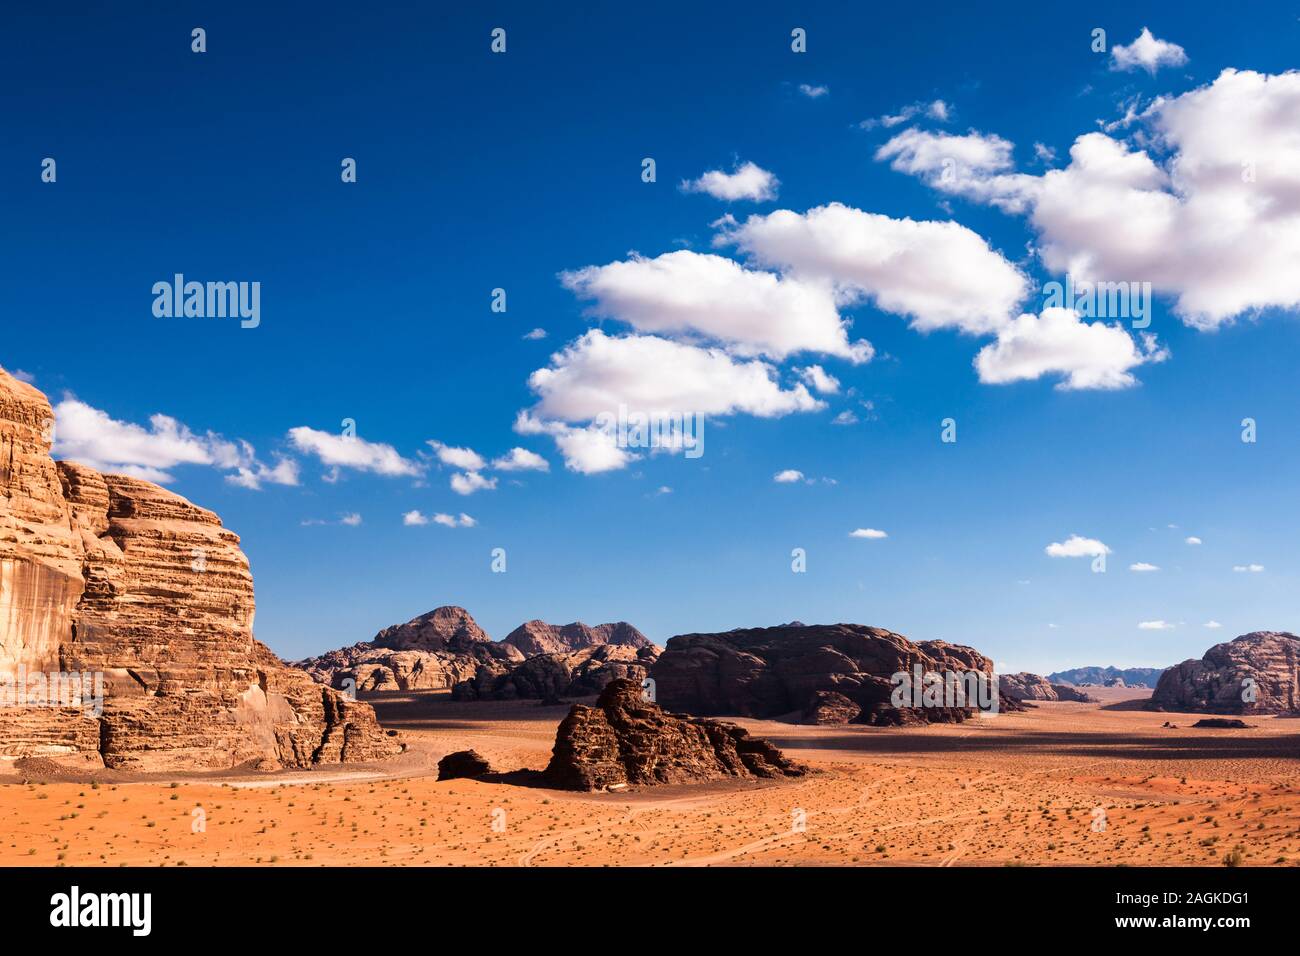 Wadi Rum, landscapes of  sandy desert, and view of eroded rocky moutains, Jordan, middle east, Asia Stock Photo